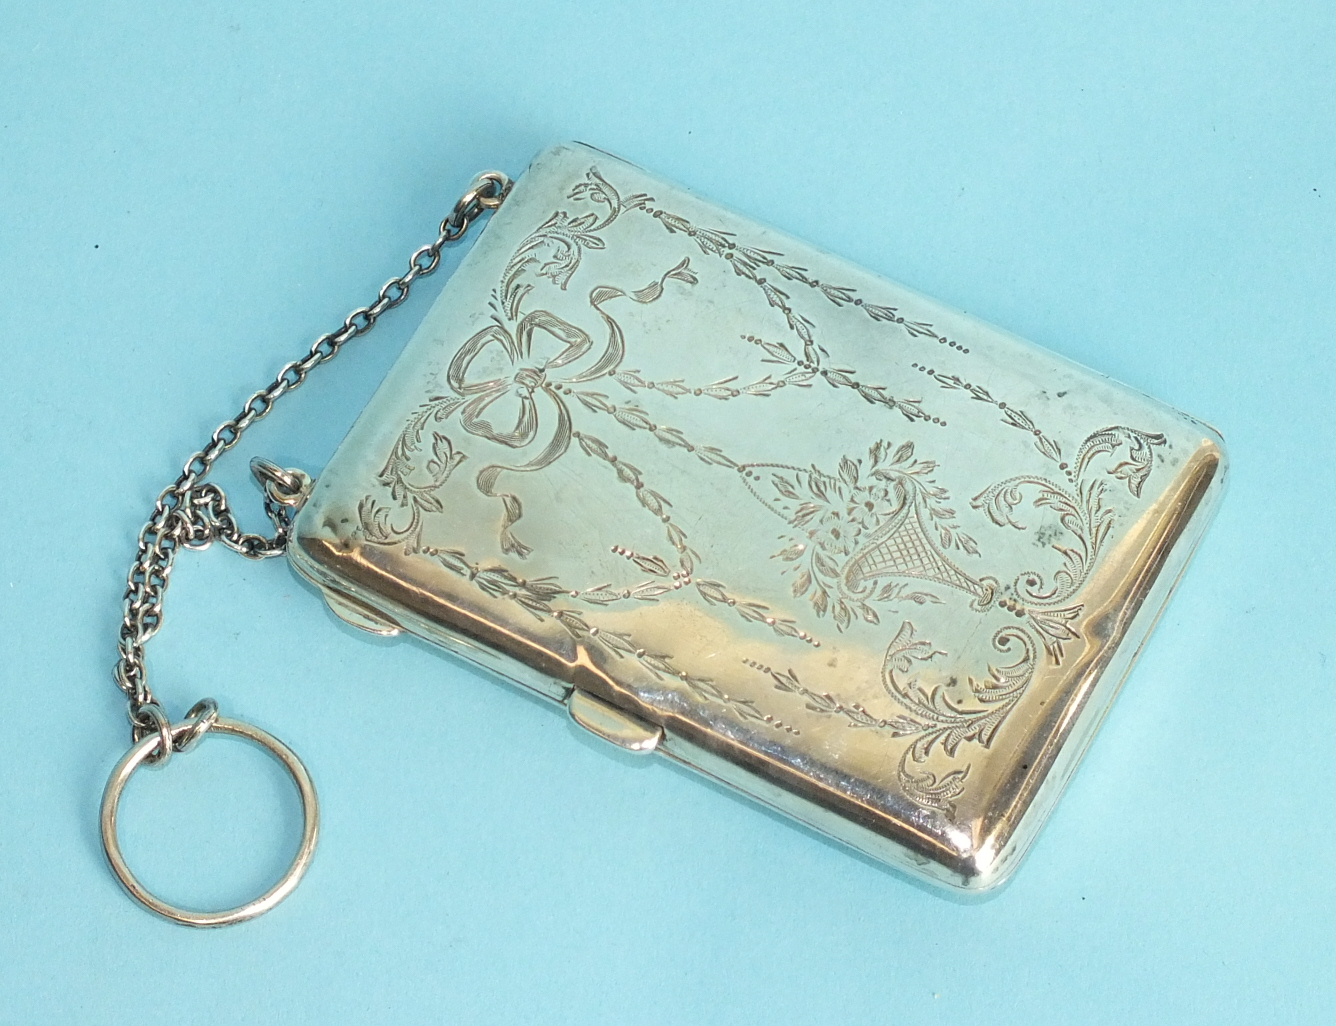 A rectangular purse engraved with ribbon-tied vases and foliage, opening to reveal a leather